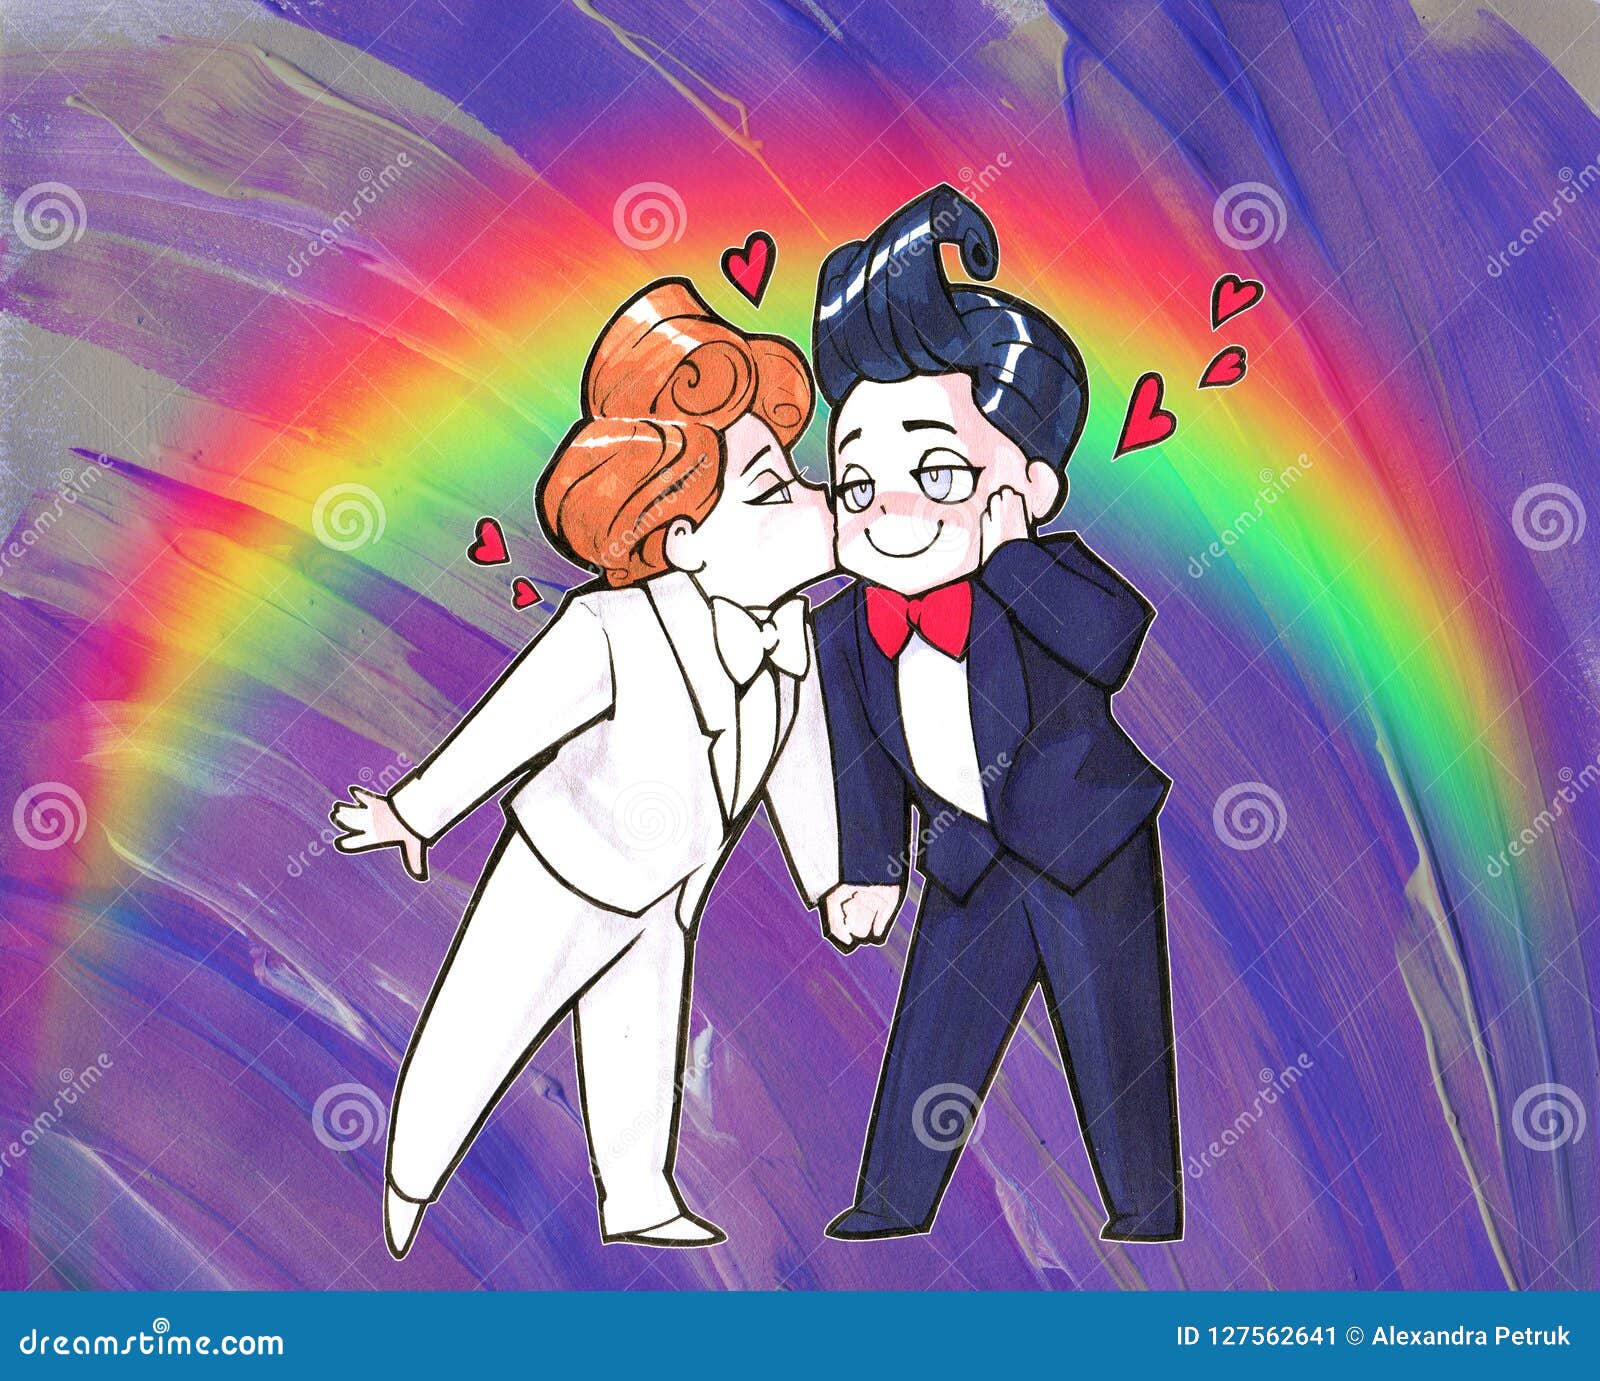 Cartoon Anime Illustration. Two Happy Handsome Men, Just Married Homosexual  Couple Stock Illustration - Illustration of character, design: 127562641